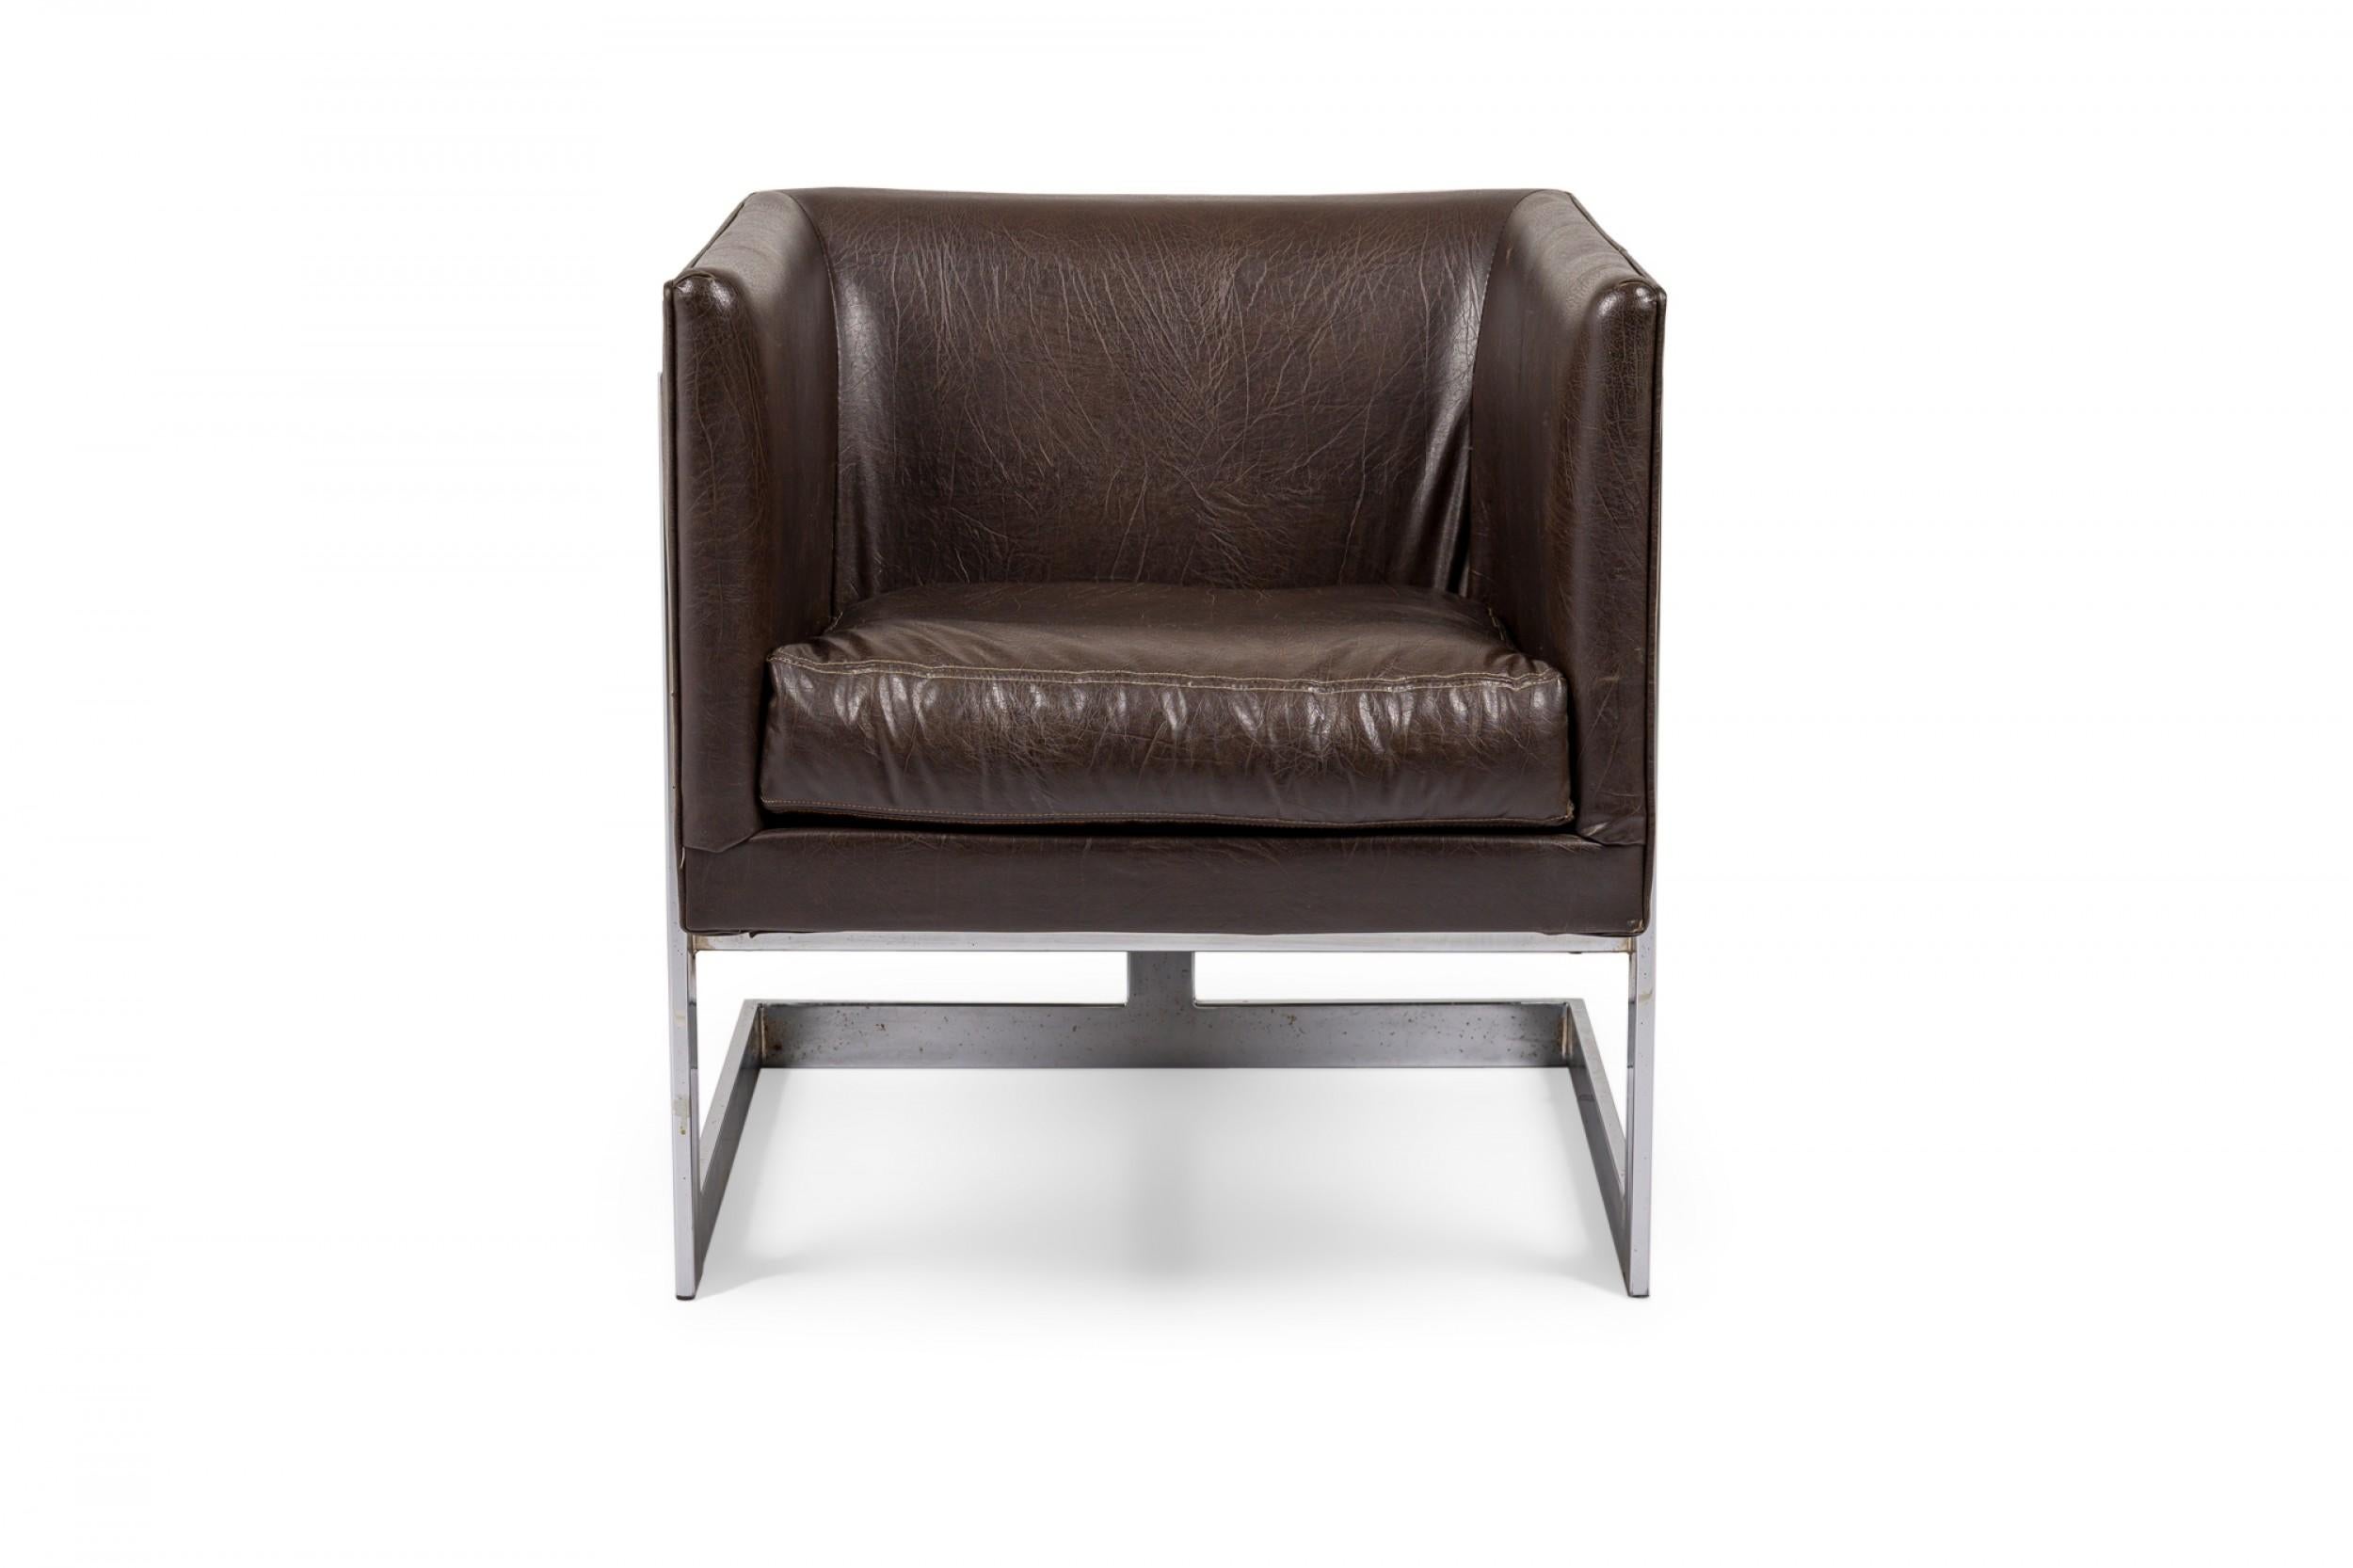 American Mid-Century cube form lounge / armchair with chocolate brown leather upholstery, resting on four short metal legs. (Milo Baughman).
   